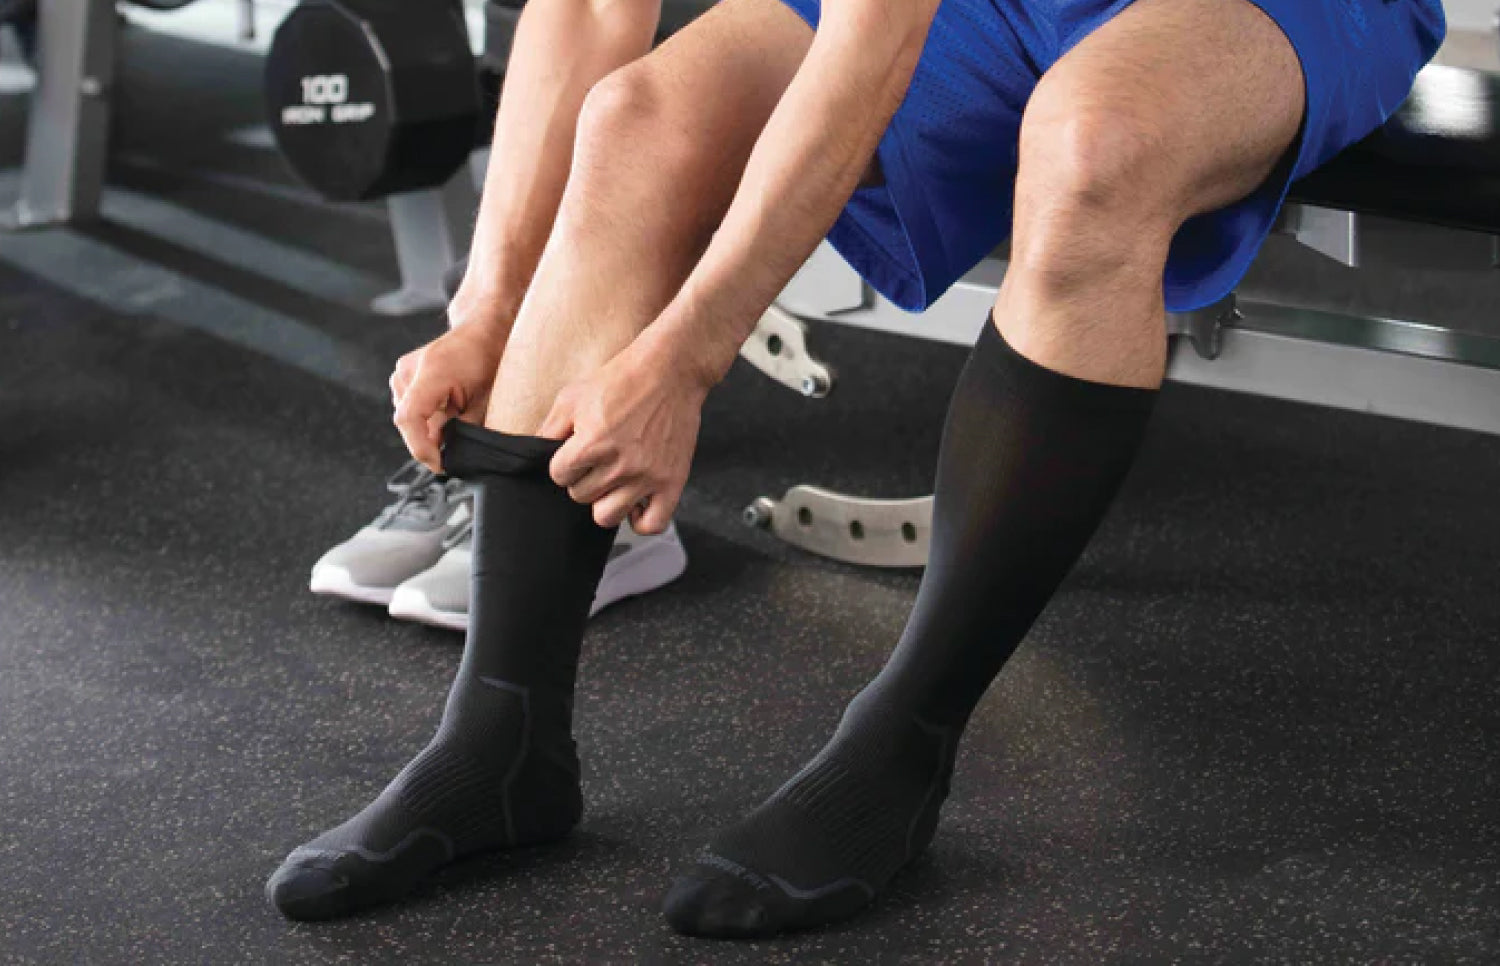 About the Benefits of Varicose Veins Socks